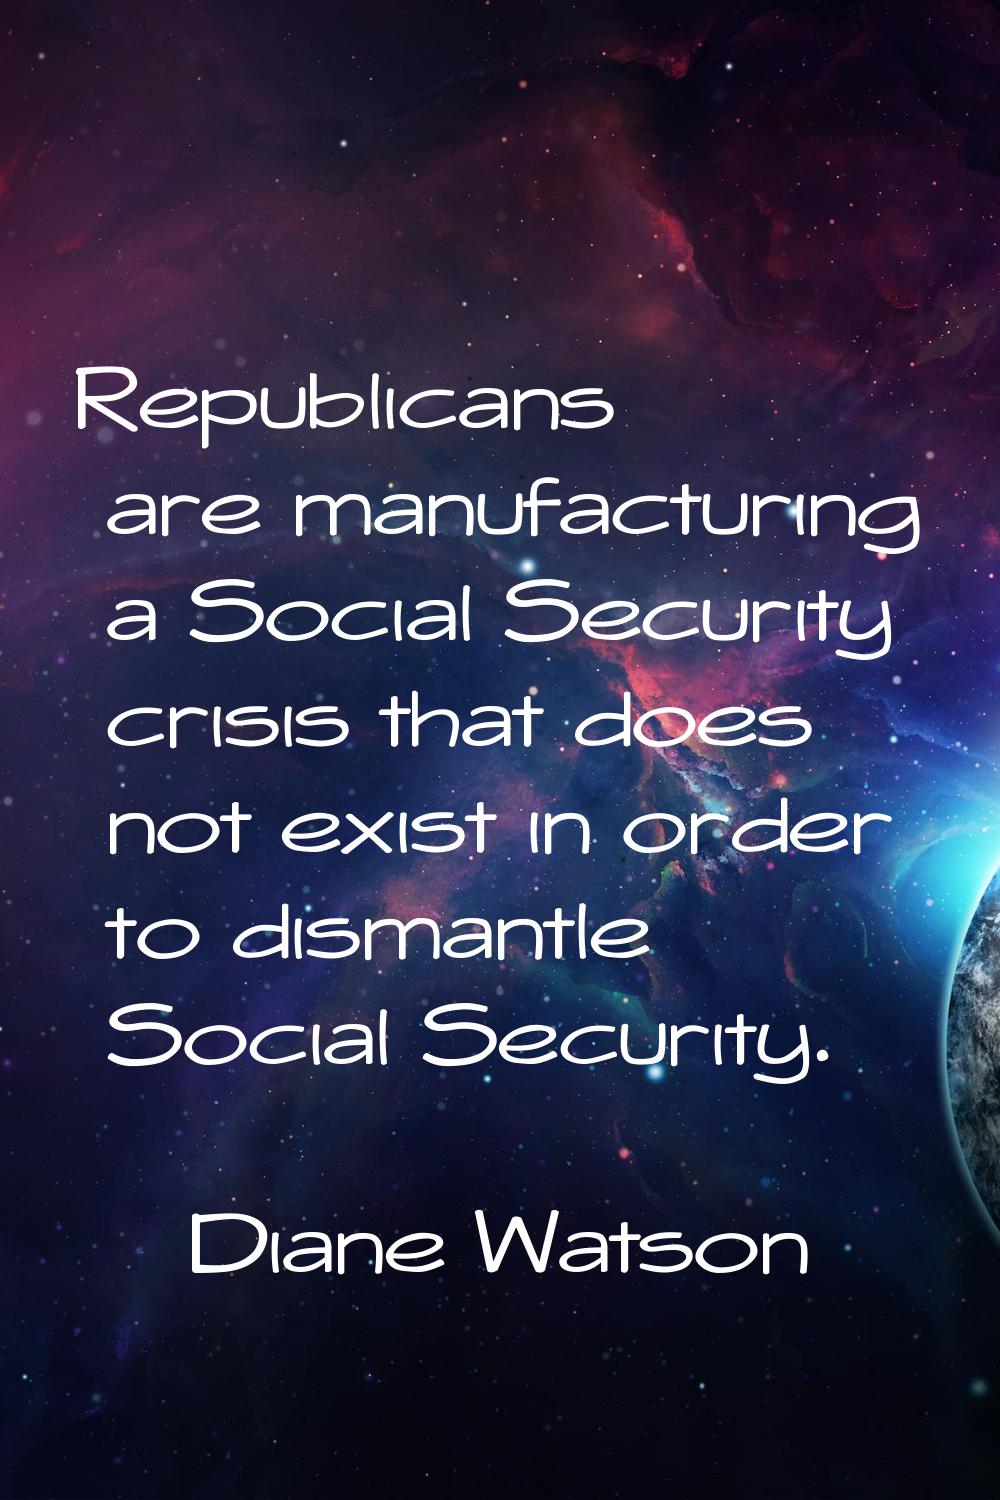 Republicans are manufacturing a Social Security crisis that does not exist in order to dismantle So